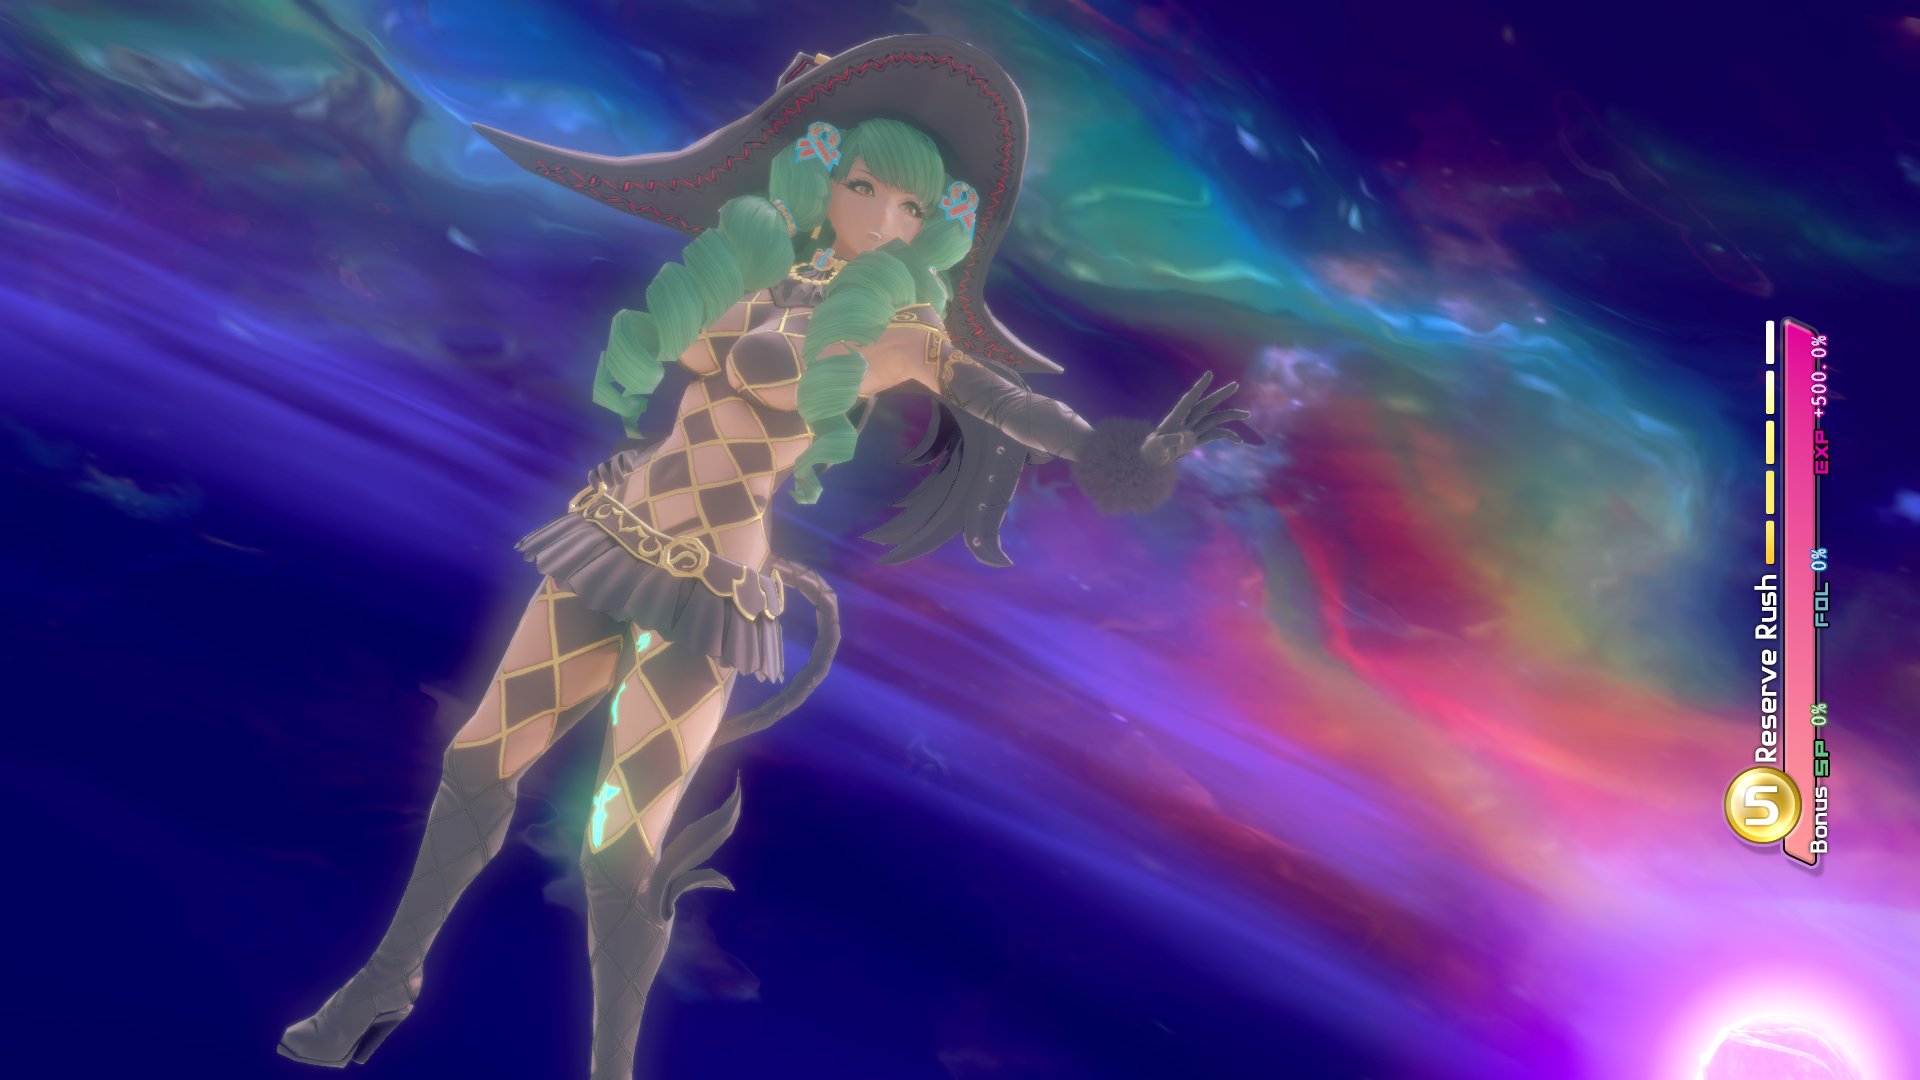 New Star Ocean 5 English Trailers: Battles, Fiore, and Victor